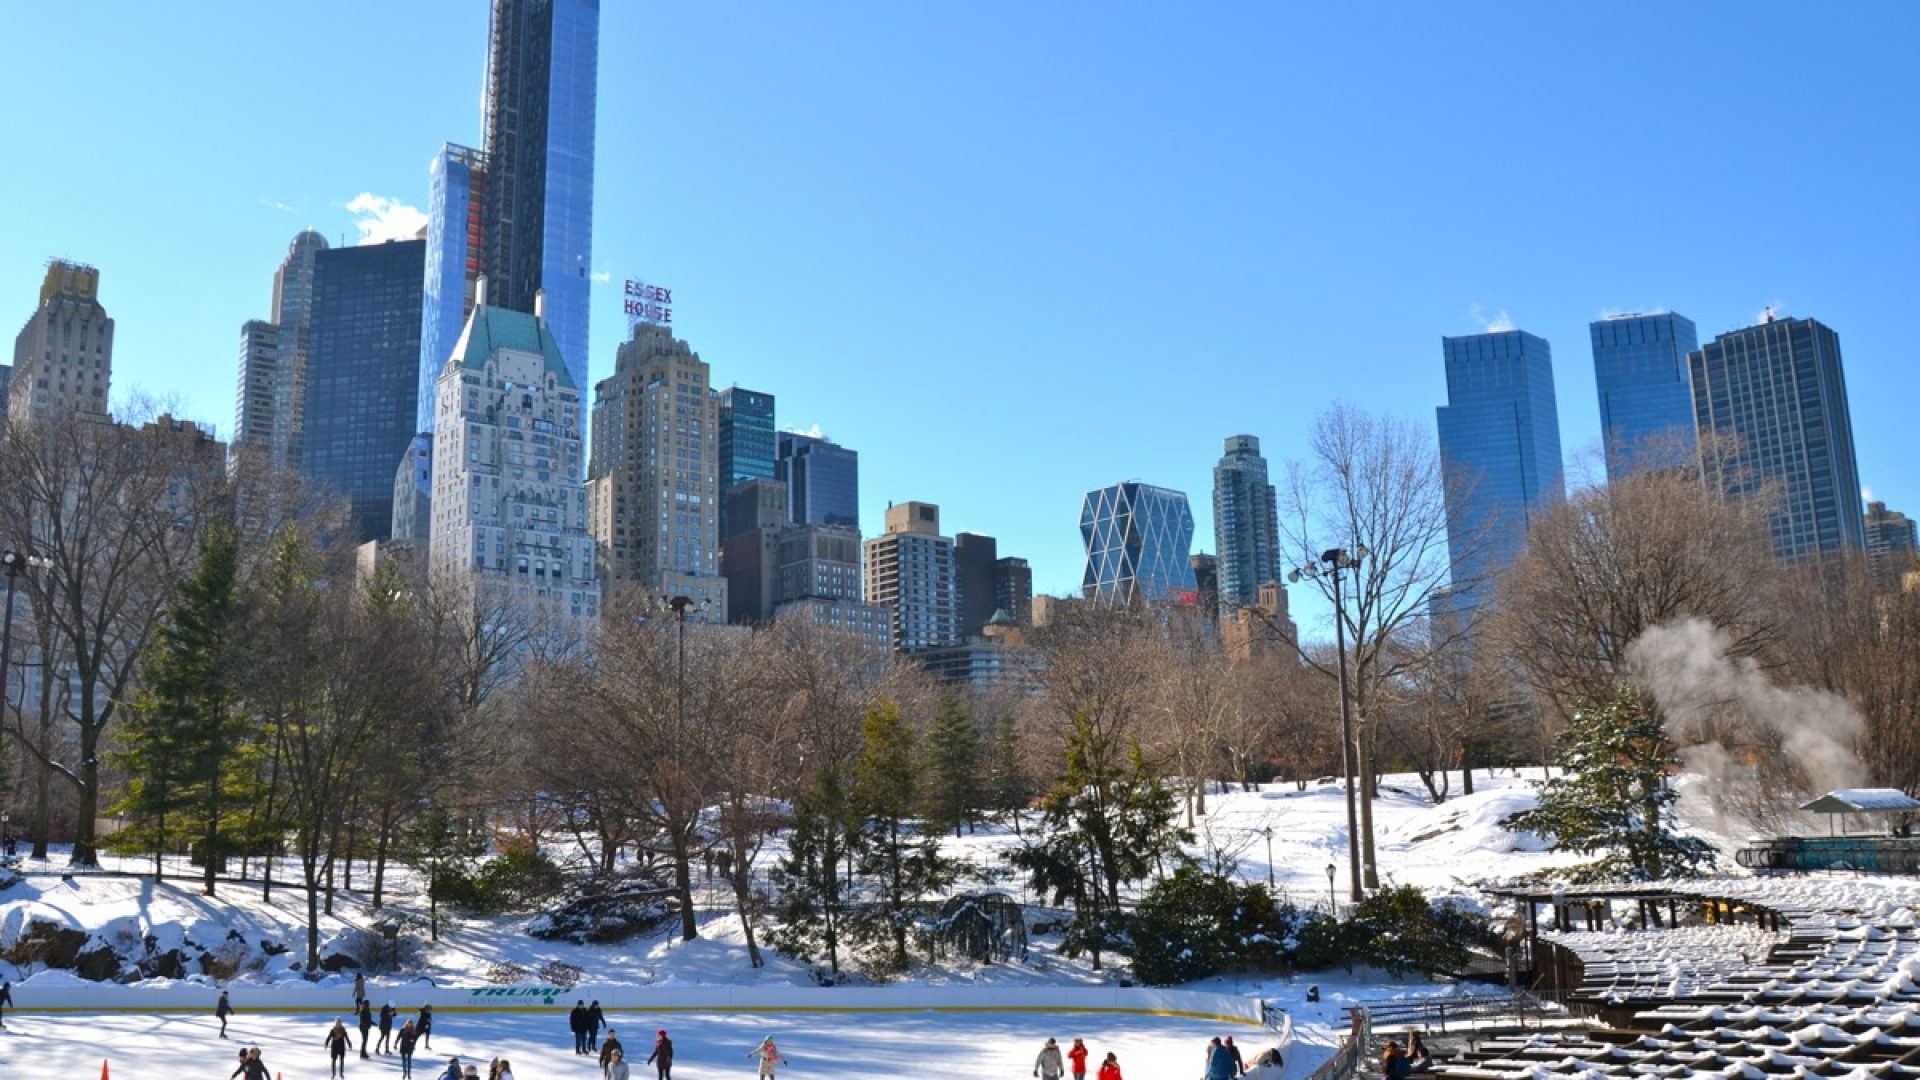 The 10 Most Charming Ice Skating Rinks in the U.S. for Winter Fun ...